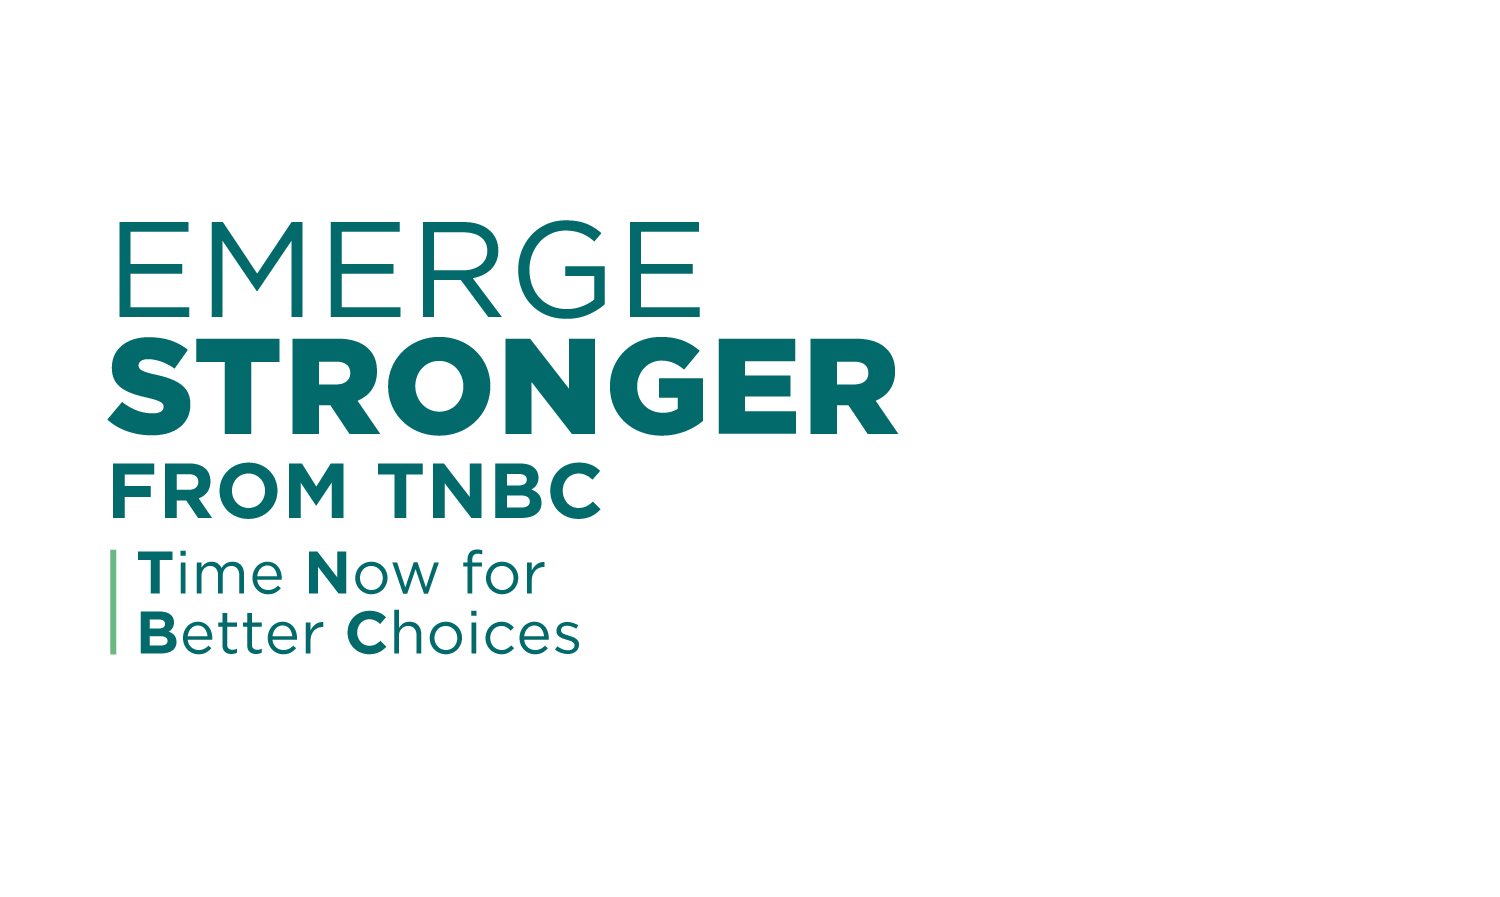 EMERGE STRONGER FROM TNBC